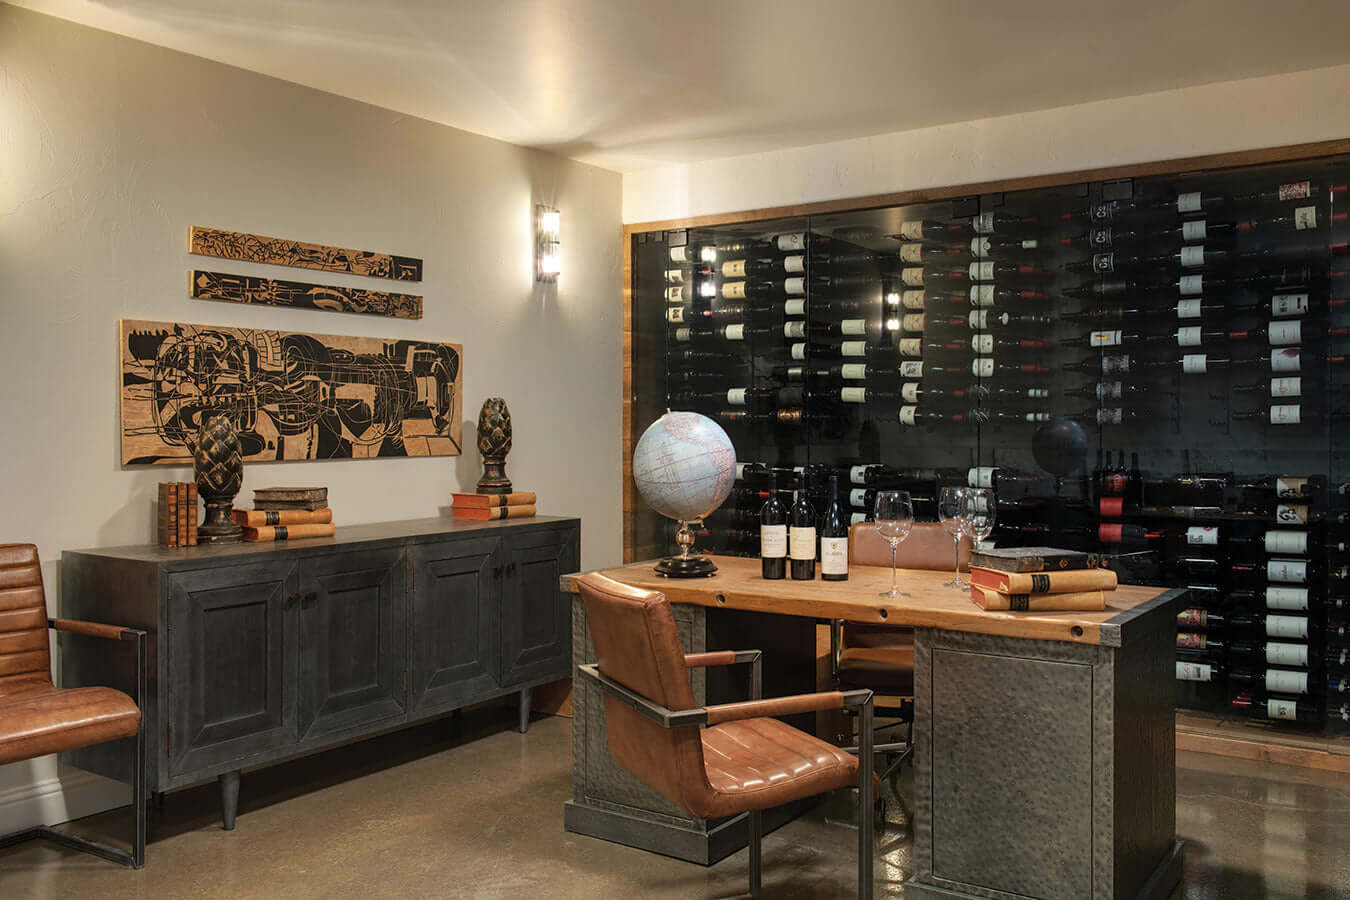 Elegant wine cellar with wall-sized wine rack, desk, and wall art